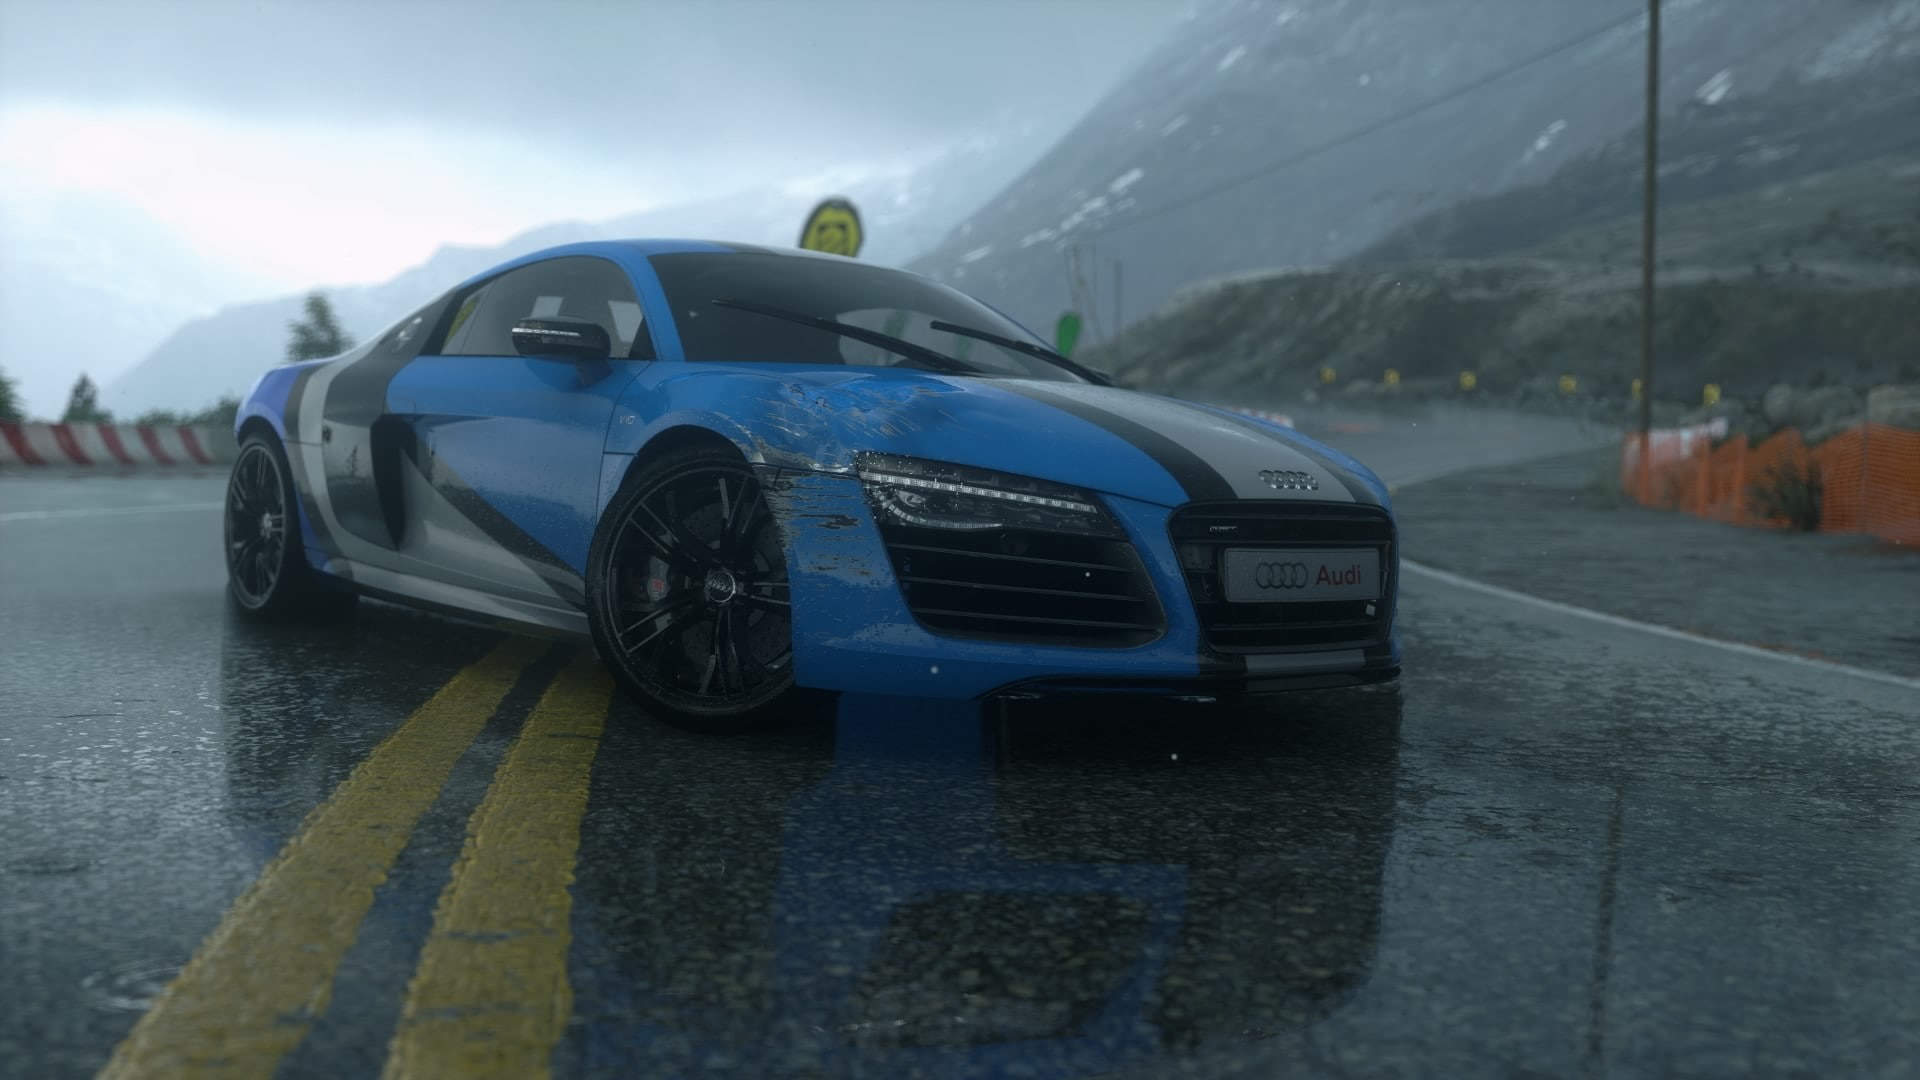 Audi R8, Forza Motorsport 5, mountains, reflection, road, Scratches